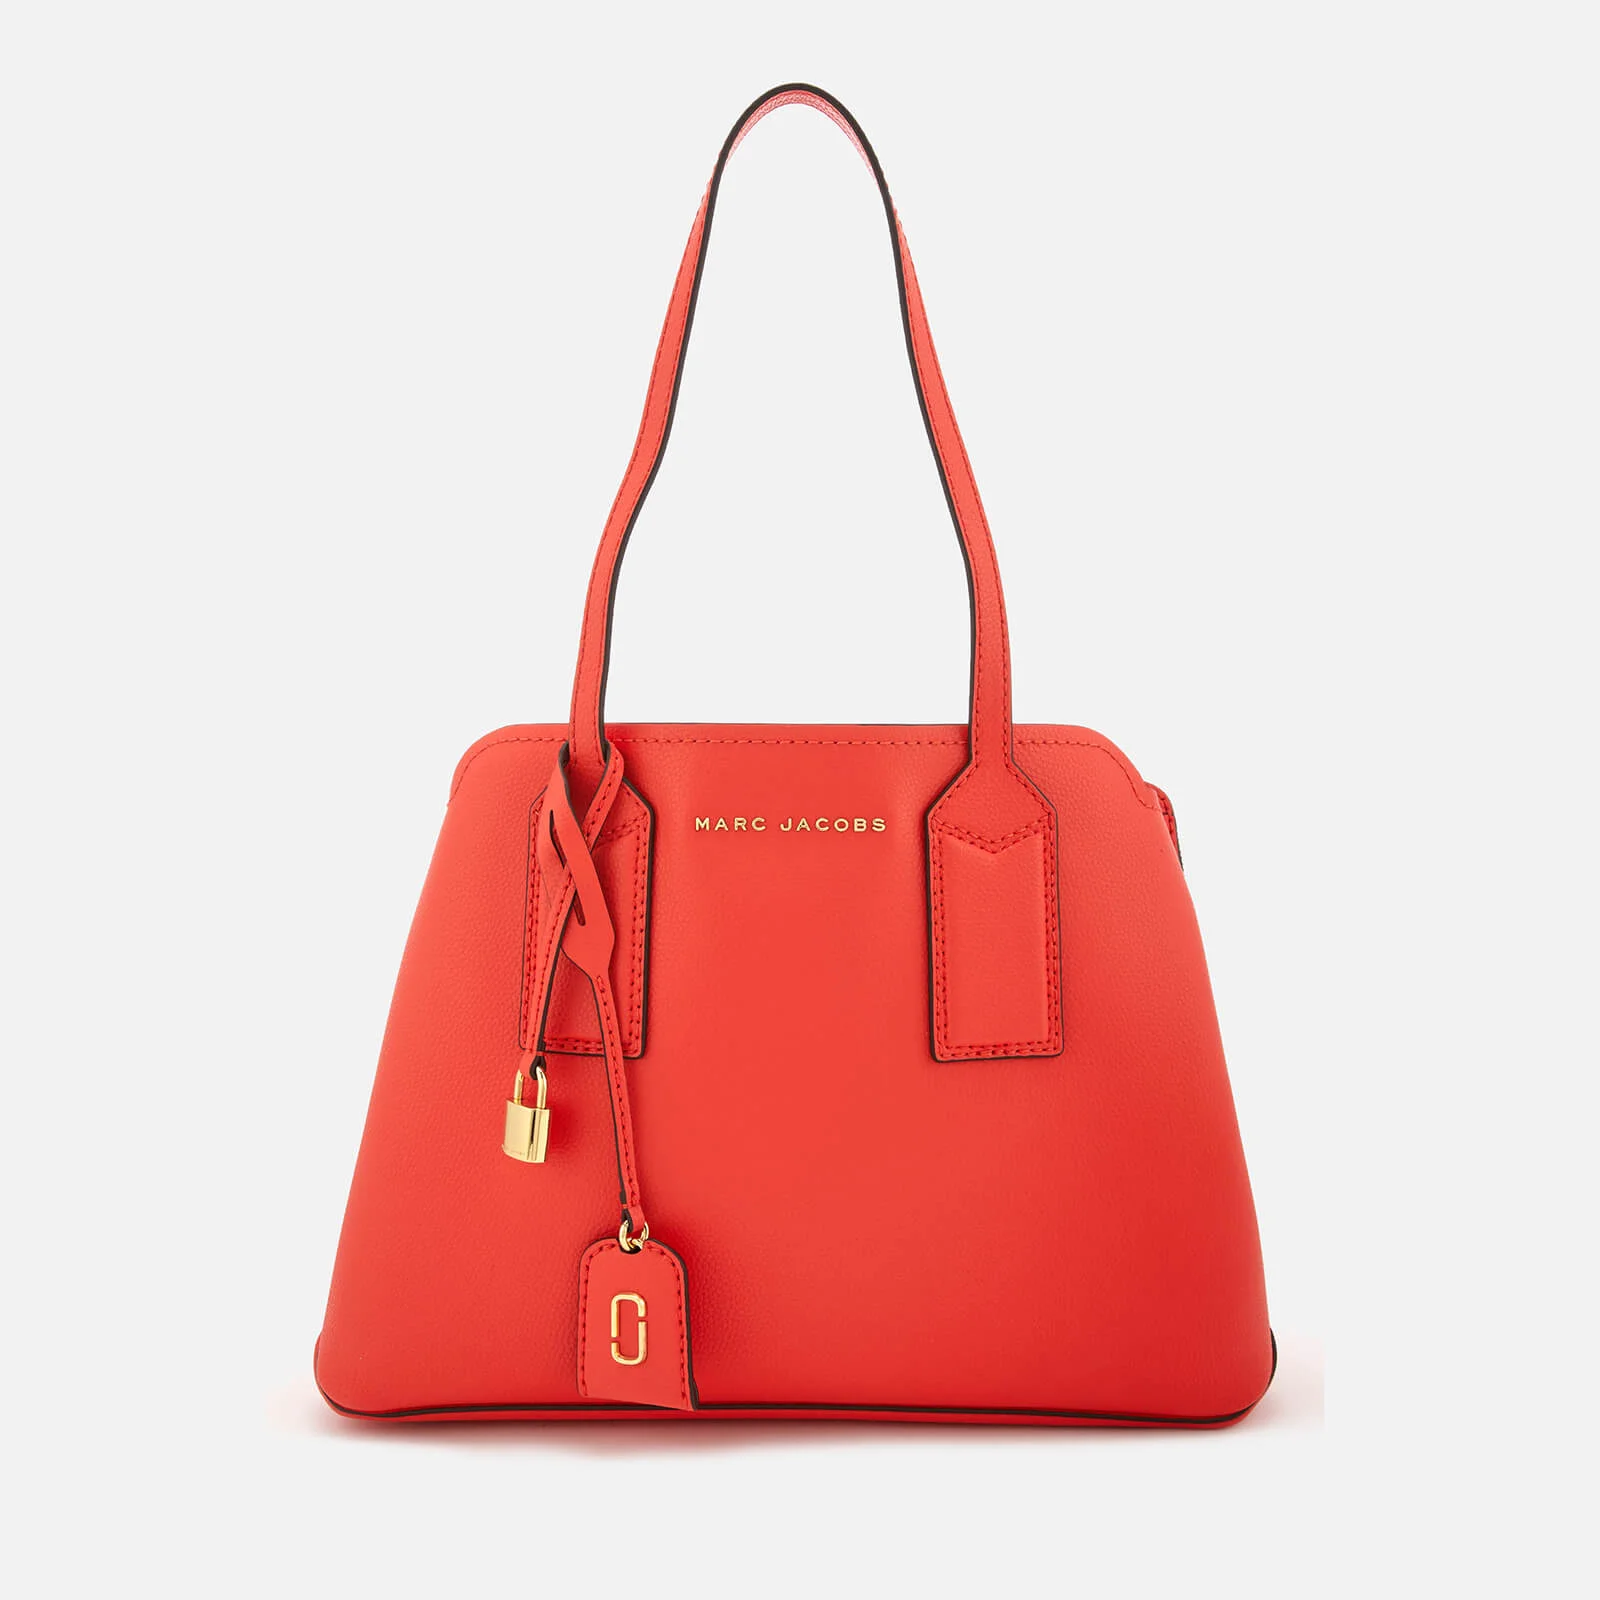 Marc Jacobs Women's The Editor Tote Bag - Poppy Red Image 1